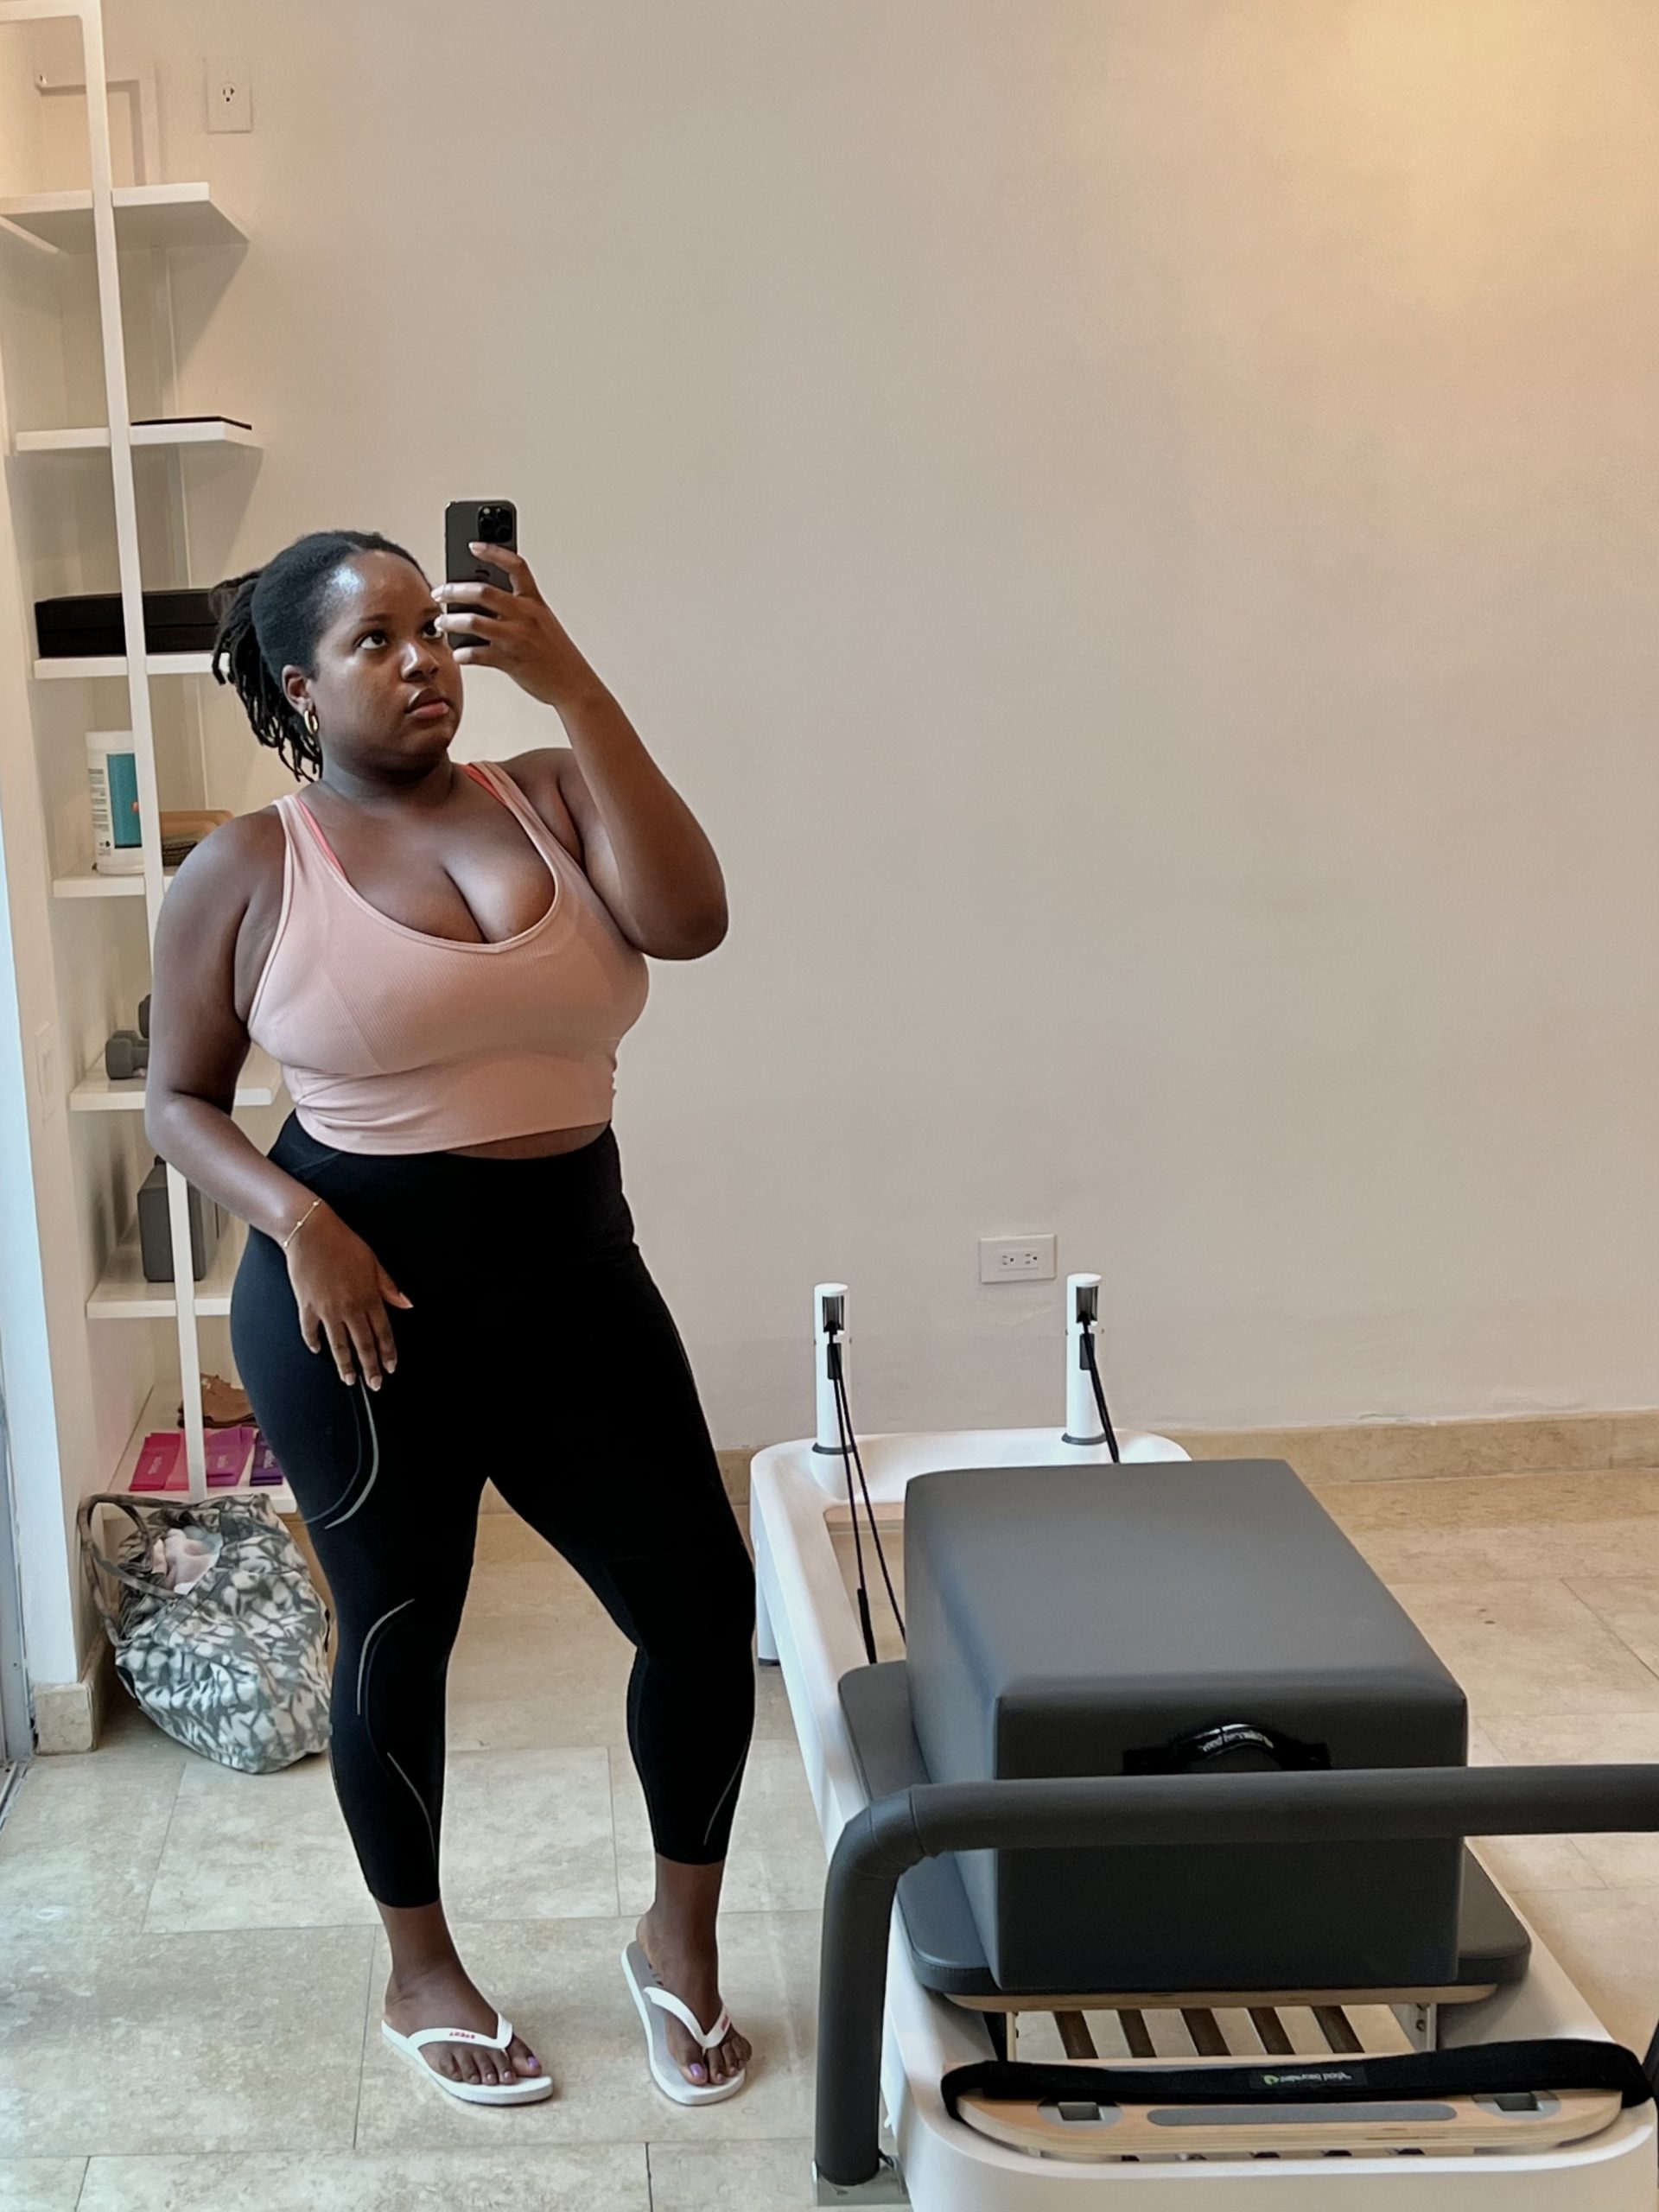 Black woman with curvy fit body in private Pilates studio standing next to reformer